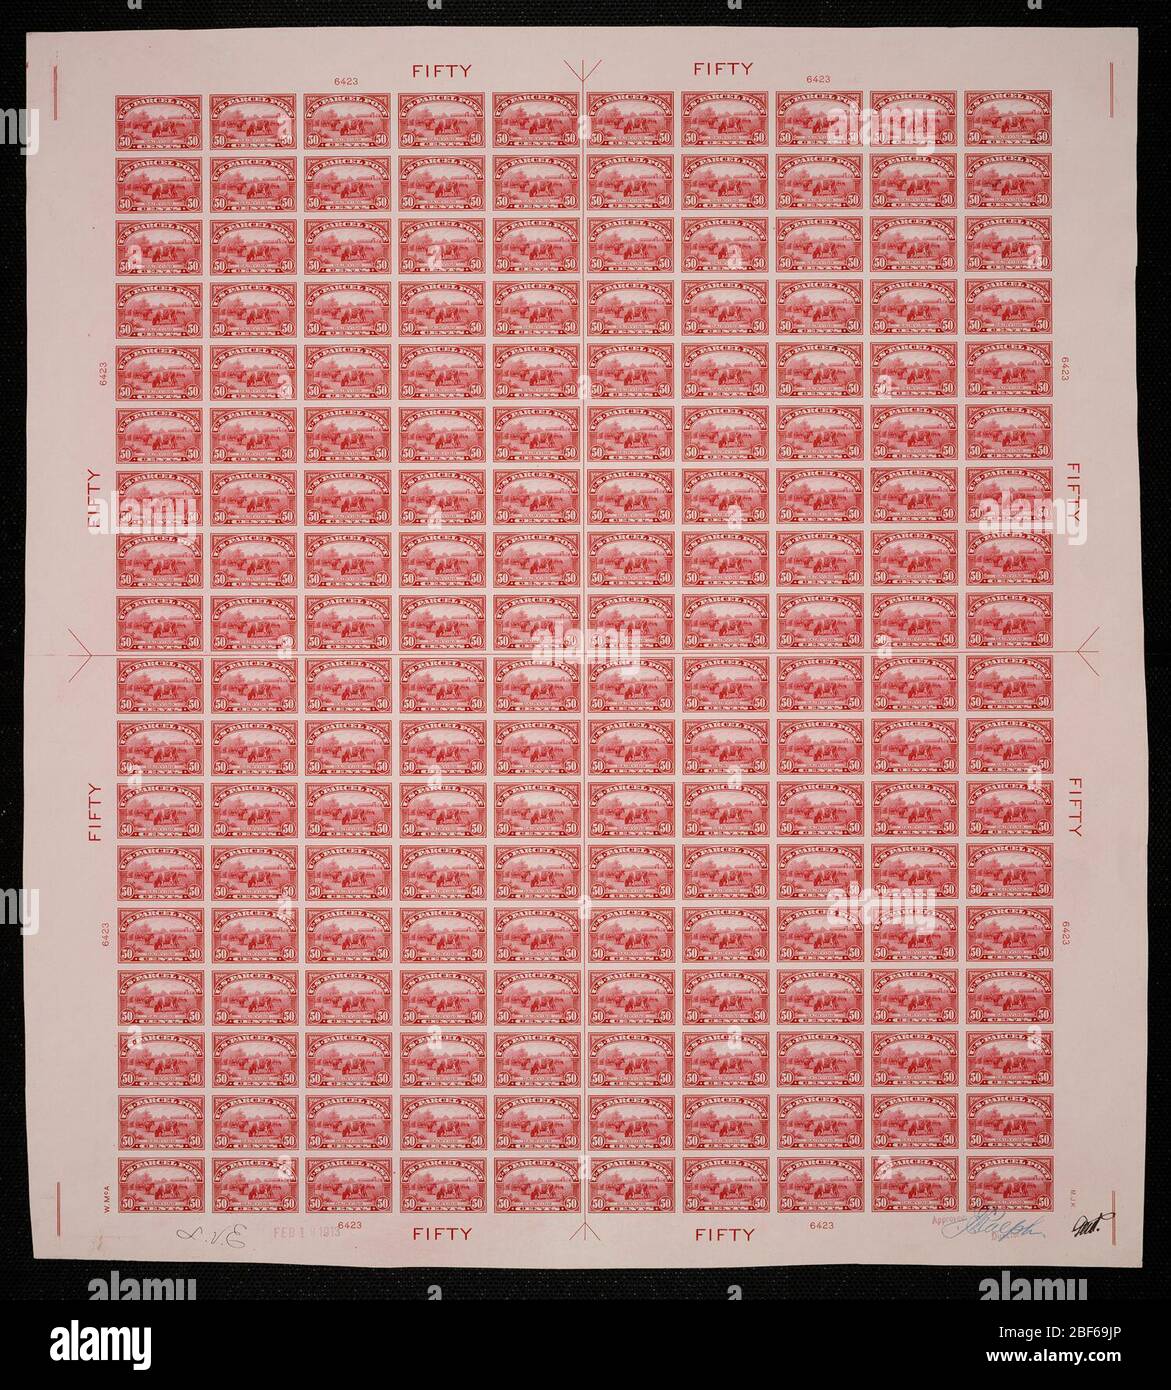 50c Dairying plate proof. Certified plate proofs are the last printed proof of the plate before printing the stamps at the Bureau of Engraving and Printing. These plate proofs are each unique, with the approval signatures and date. Stock Photo